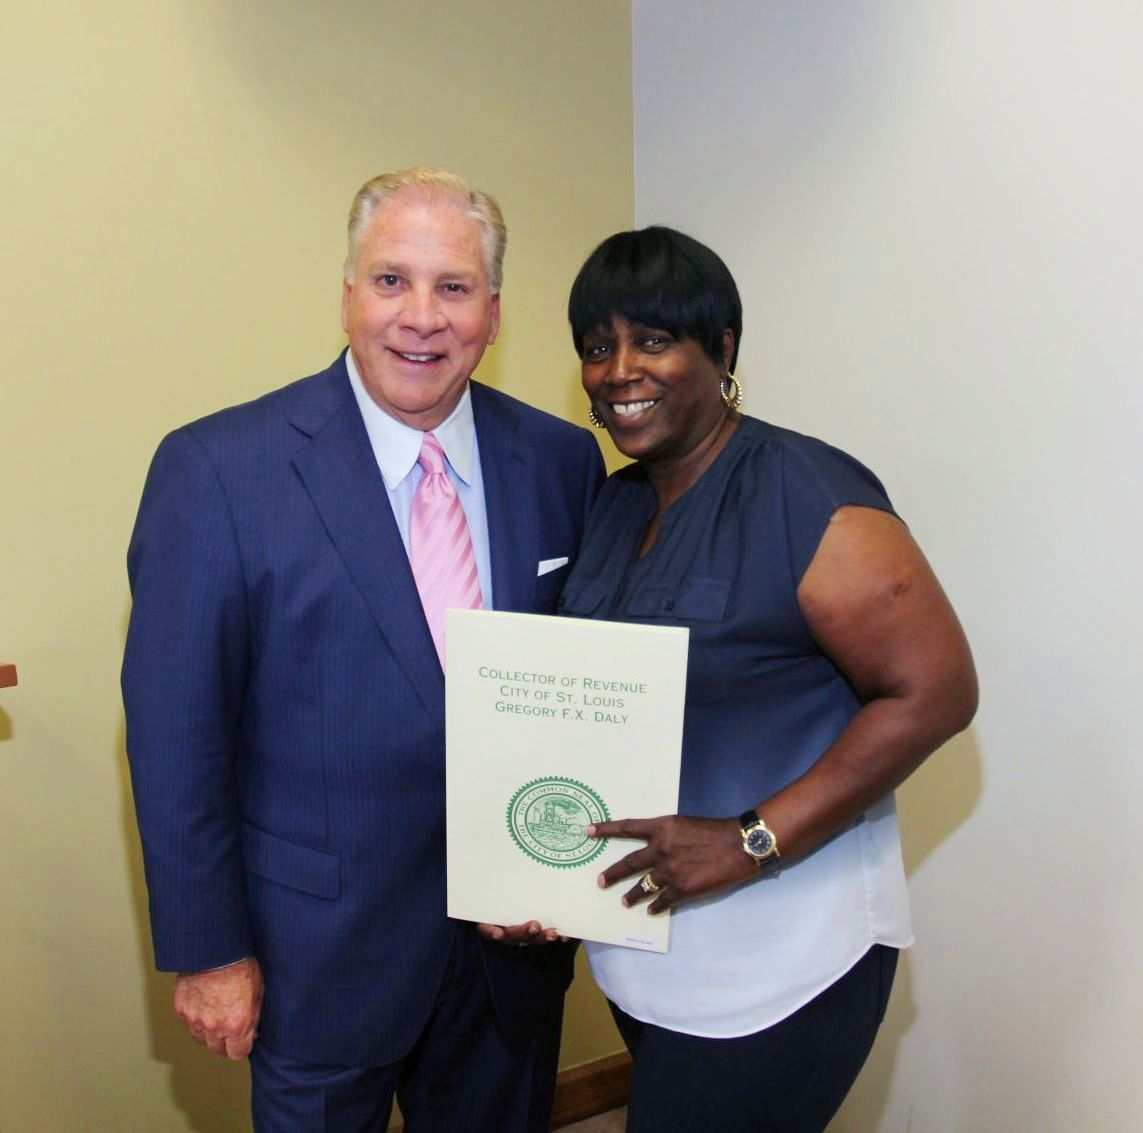 Collector of Revenue Gregory F.X. Daly congratulates Monica Palmer on 5 years of service in the Collector's Office.